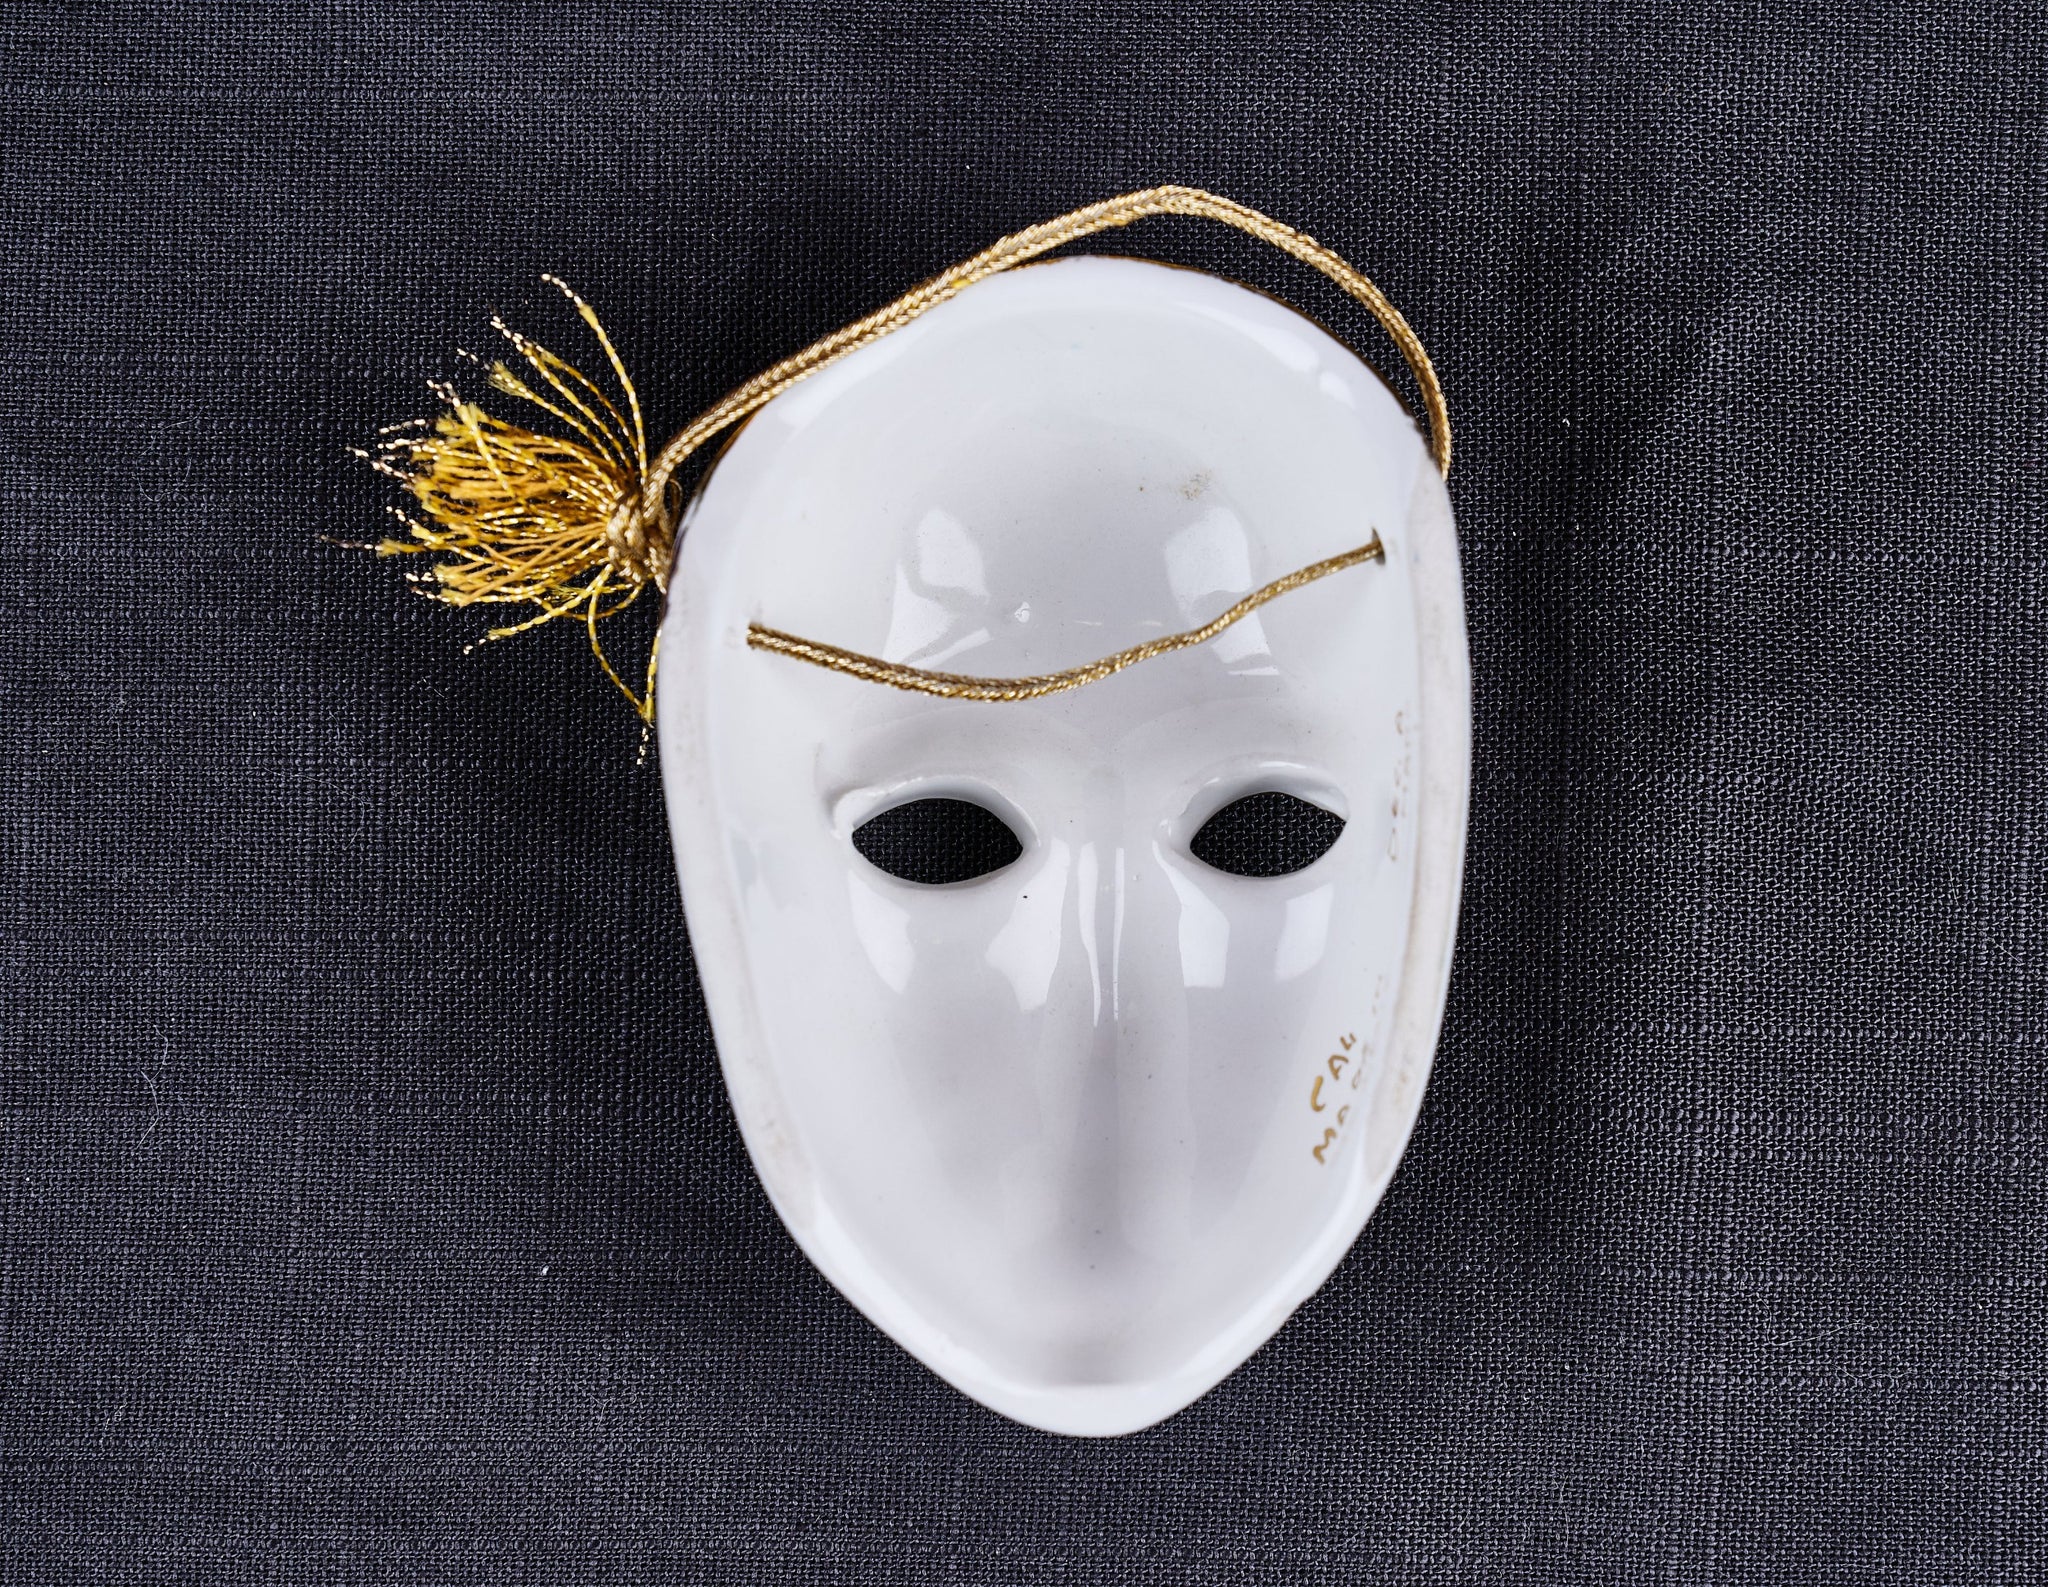 CERAMIC PAINTED FACE MASK DECORATIVE WALL HANGING MASK